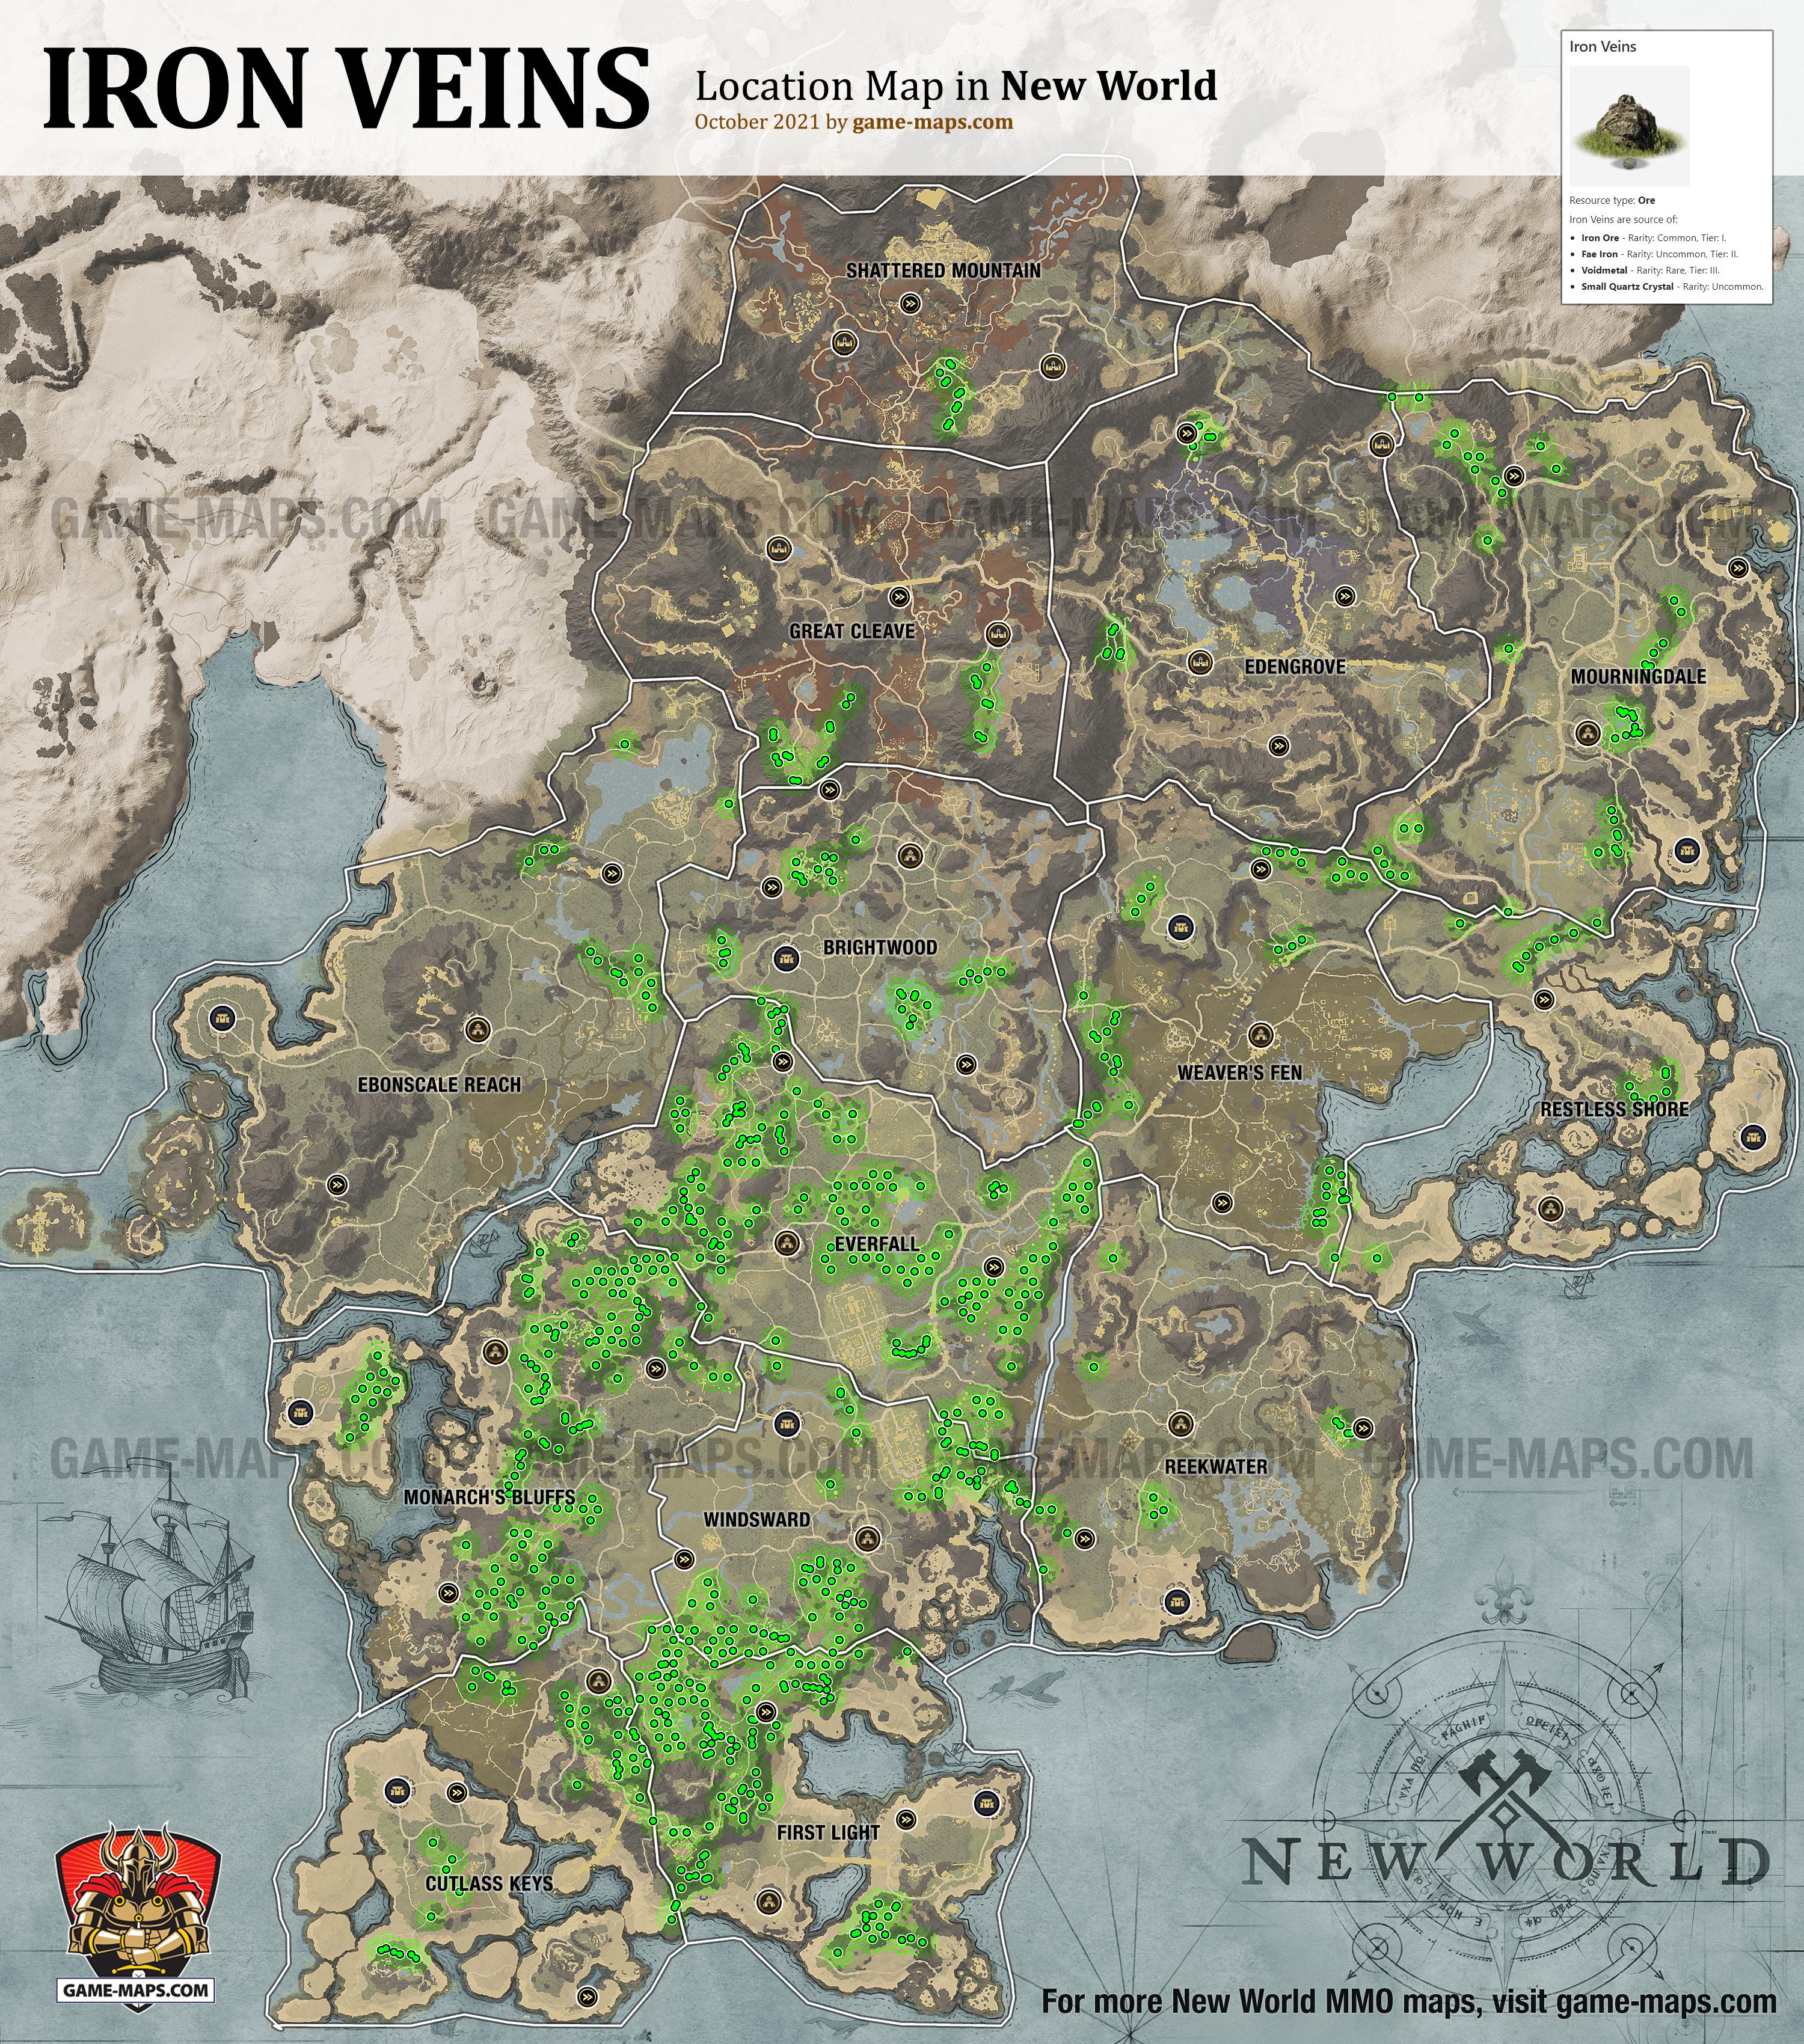 New World Resource Location Map of Iron Veins, Source of Ore Crafting Resources: Iron Ore, Fae Iron, Voidmetal, Small Quartz Crystal